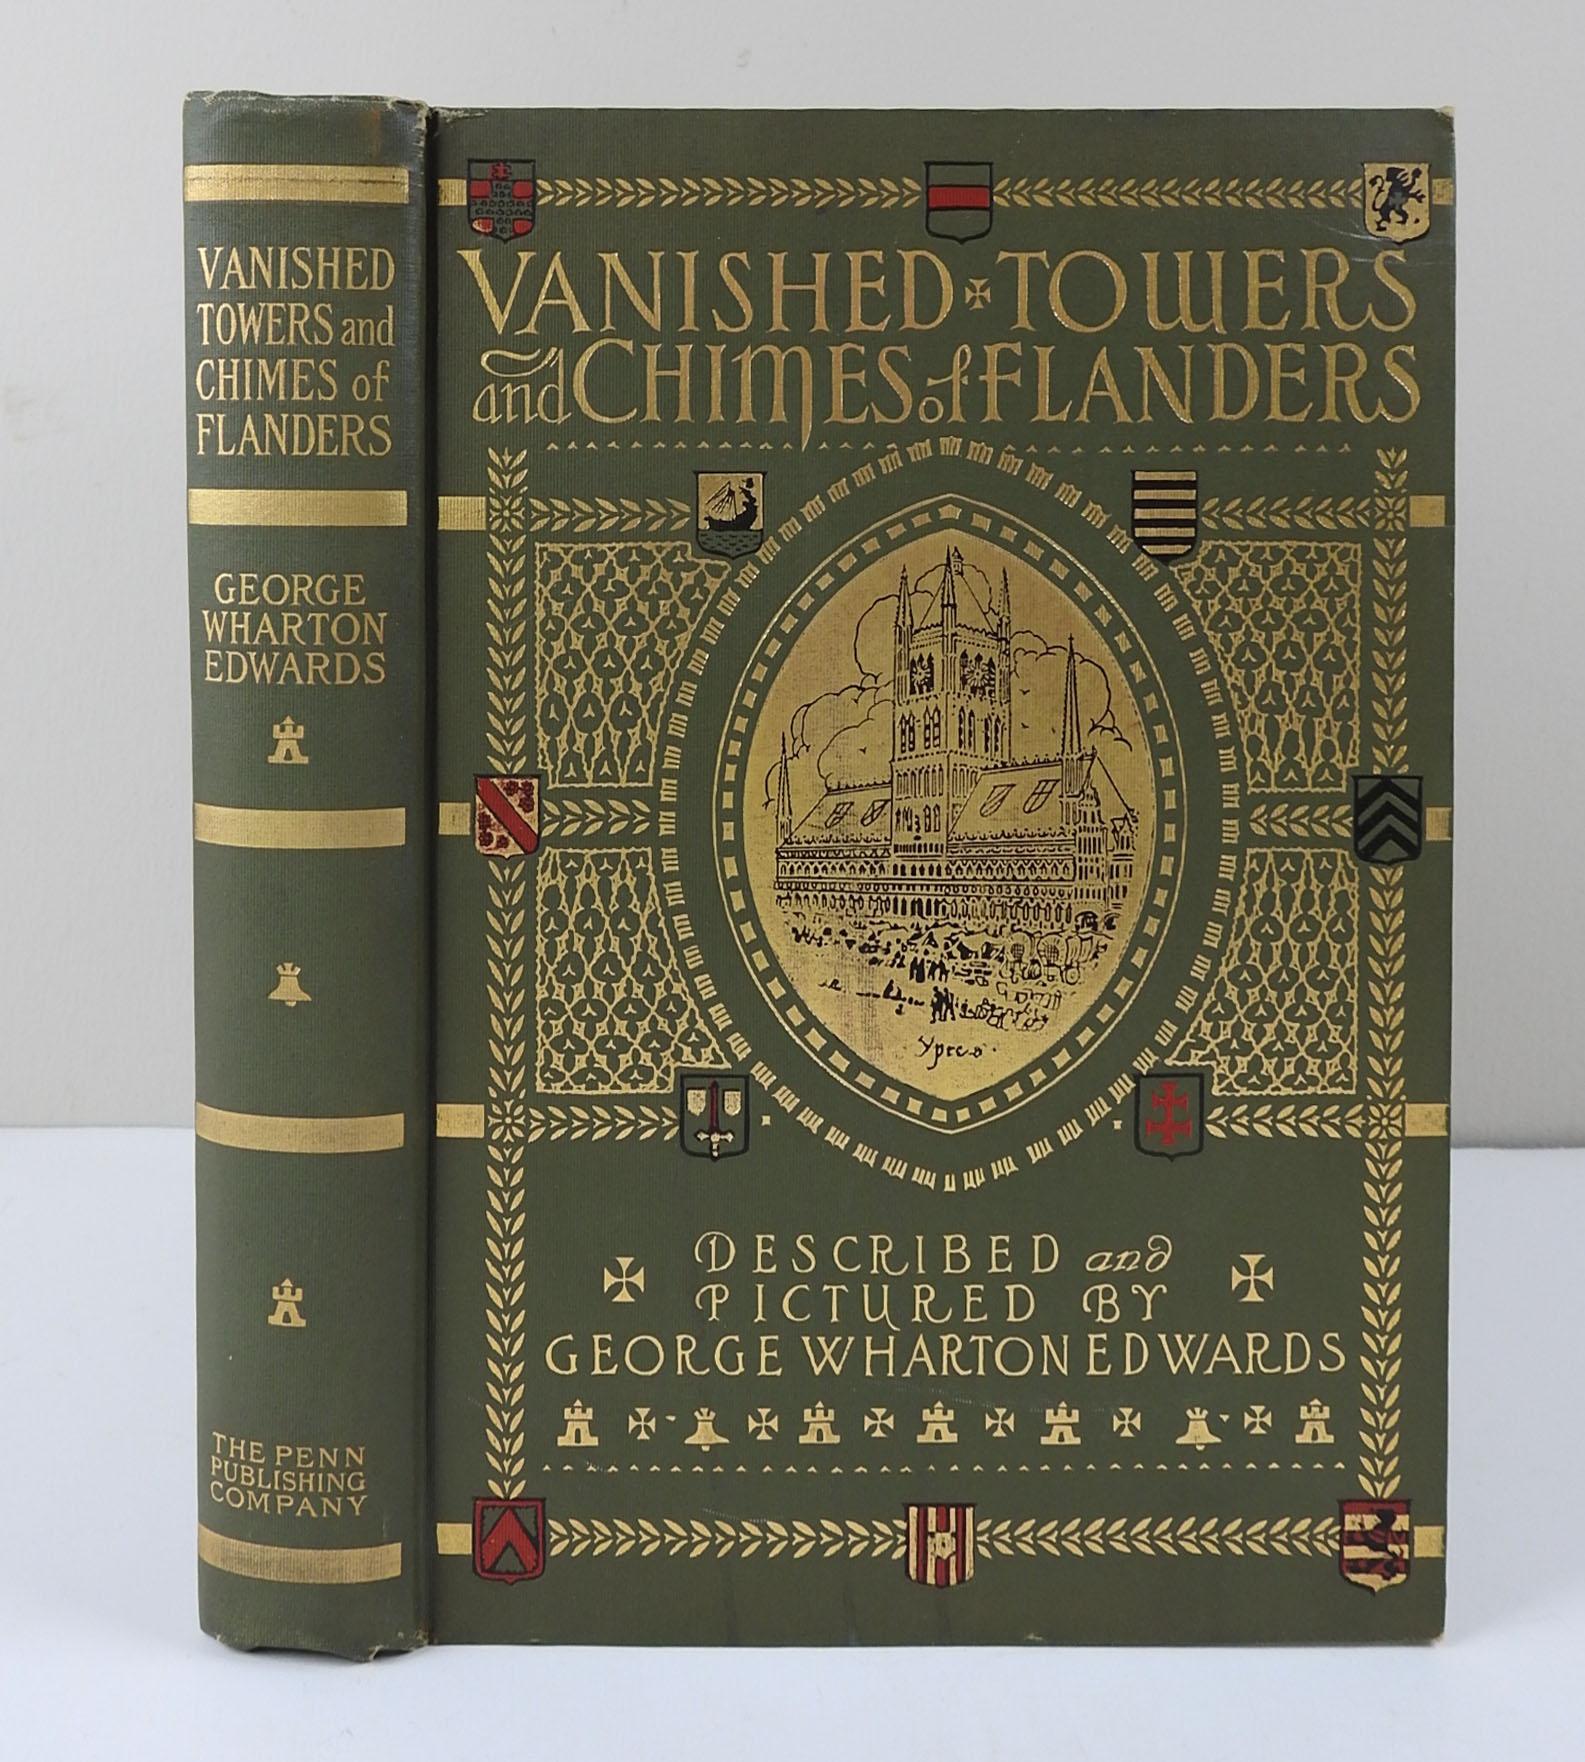 Vanished Towers and Chimes of flanders by George Wharton Edwards, illustrated by author. Published by Penn Publishing Company, Philadelphia, 1916. Green cloth binding with decorative gilt and embossed front and spine, gilt top page edges, shelf wear.